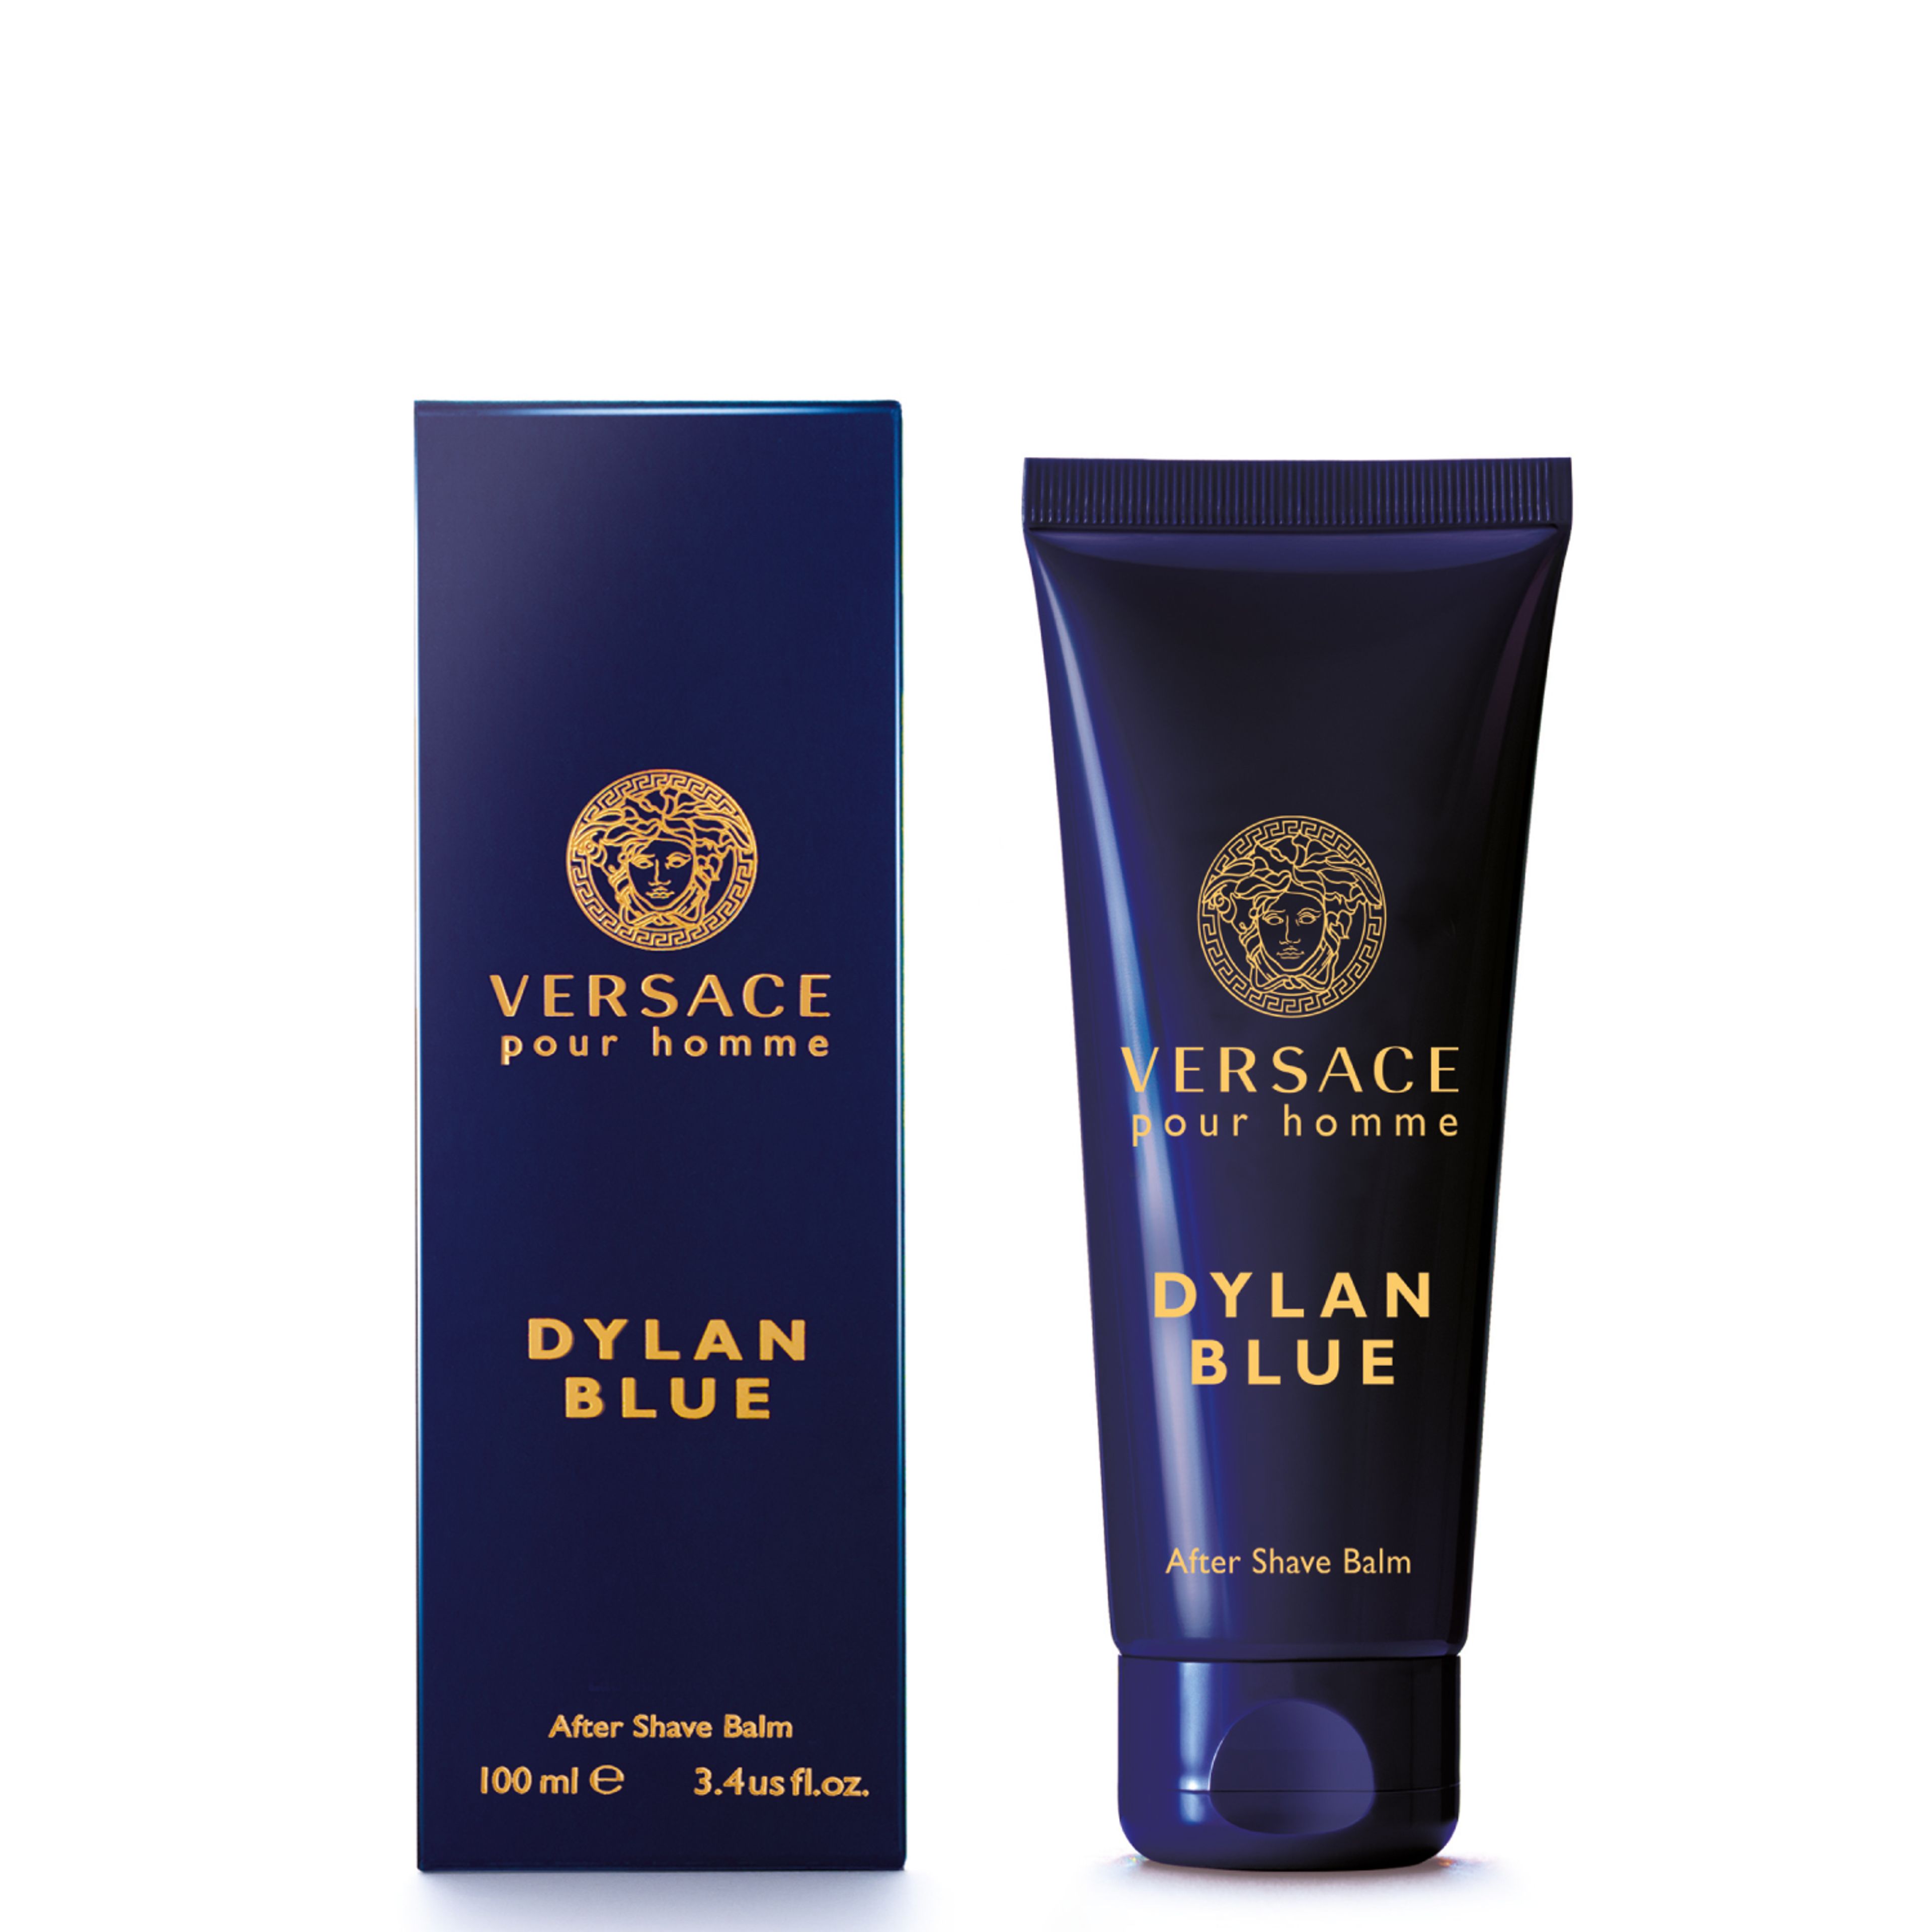 Versace Pour Homme Dylan Blue After Shave Balm 1